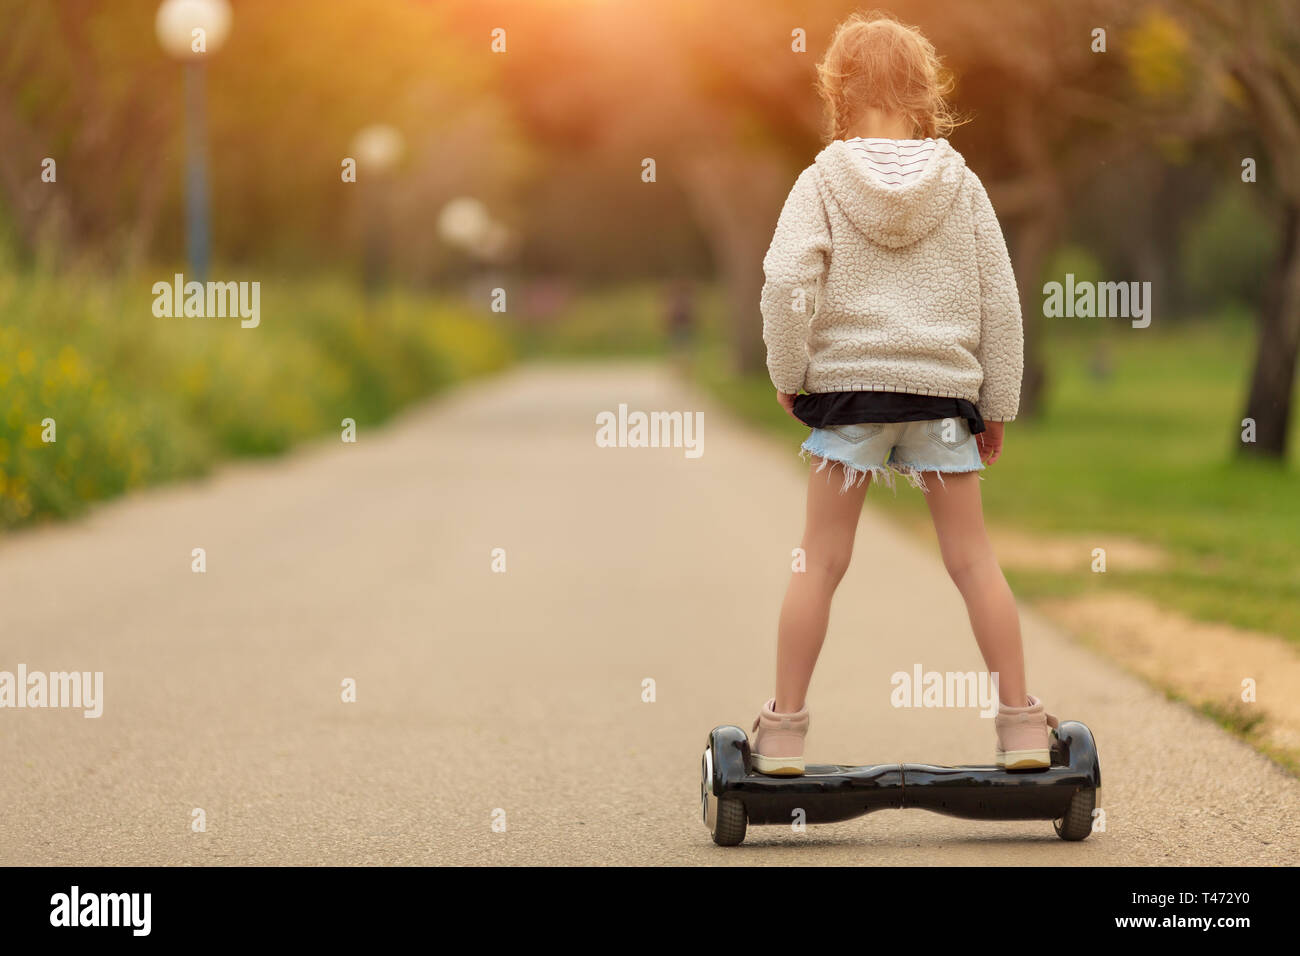 Girl riding on the hoverboard in the park Stock Photo